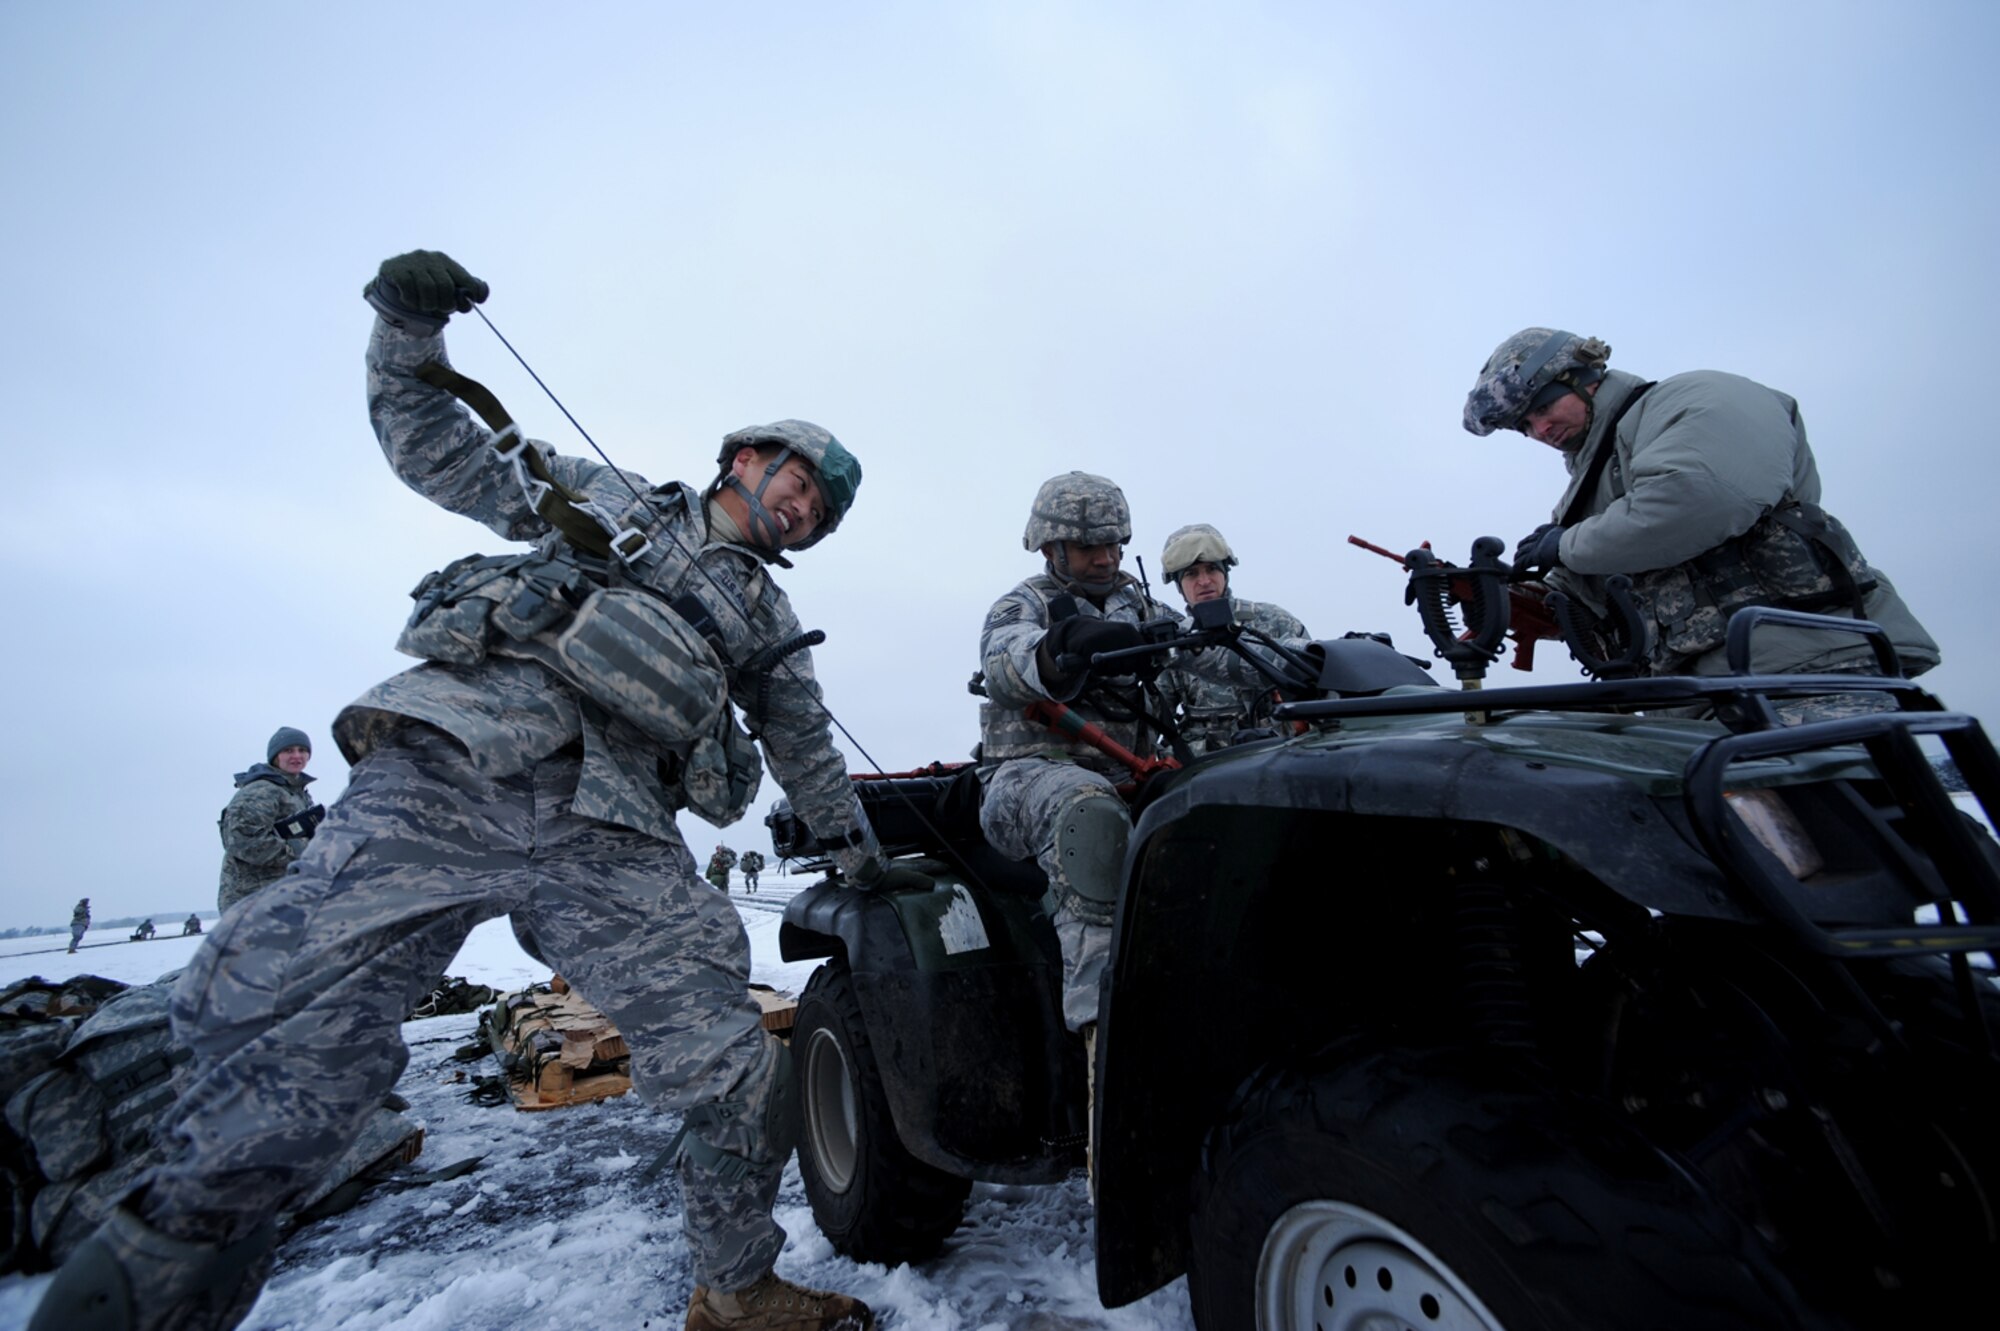 U.S. Air Force members from 435th Air Ground Operations Wing, Ramstein Air Base, Germany, attempt to start their four-wheeler after an airborne insertion mission, Flugplatz Bitburg, Germany, Jan. 25, 2010, in preparation of Ramstein's operational readiness inspection in September. The unit is setting up bare-base operations as part of the dual-wing operational readiness exercise with the 86th Airlift Wing. This is the second of five operational readiness exercises. (U.S. Air Force photo by Staff Sgt. Sarayuth Pinthong)